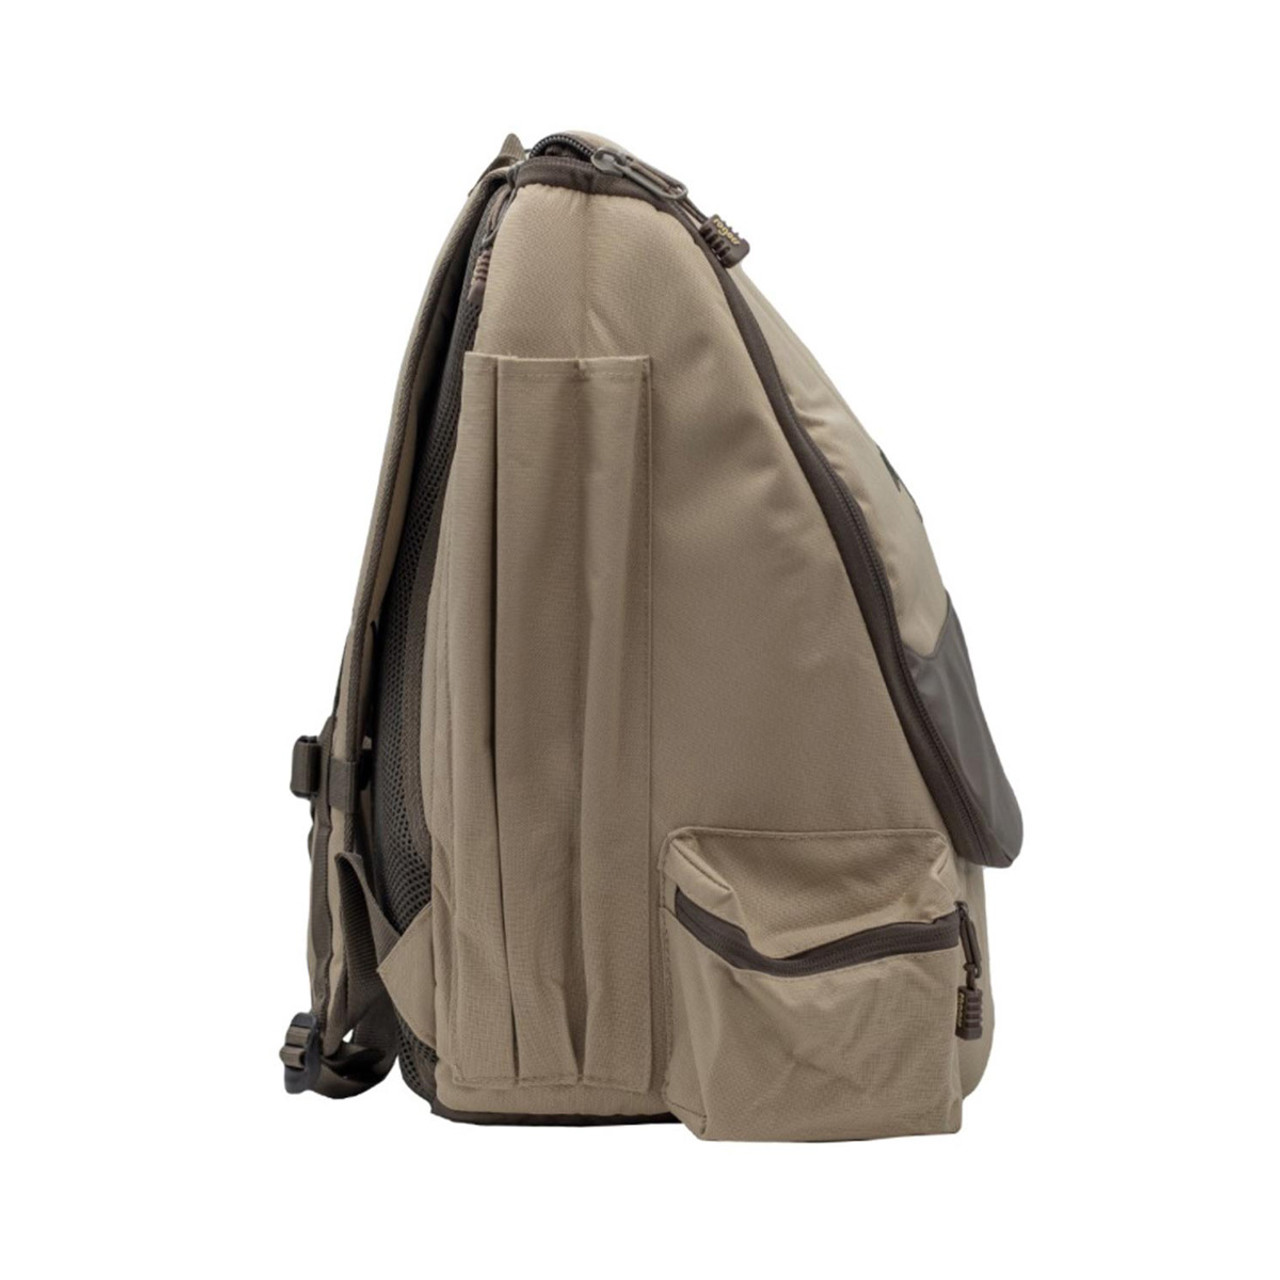 Rogers Double Spinning Wing Decoy Back Pack | Rogers Sporting Goods